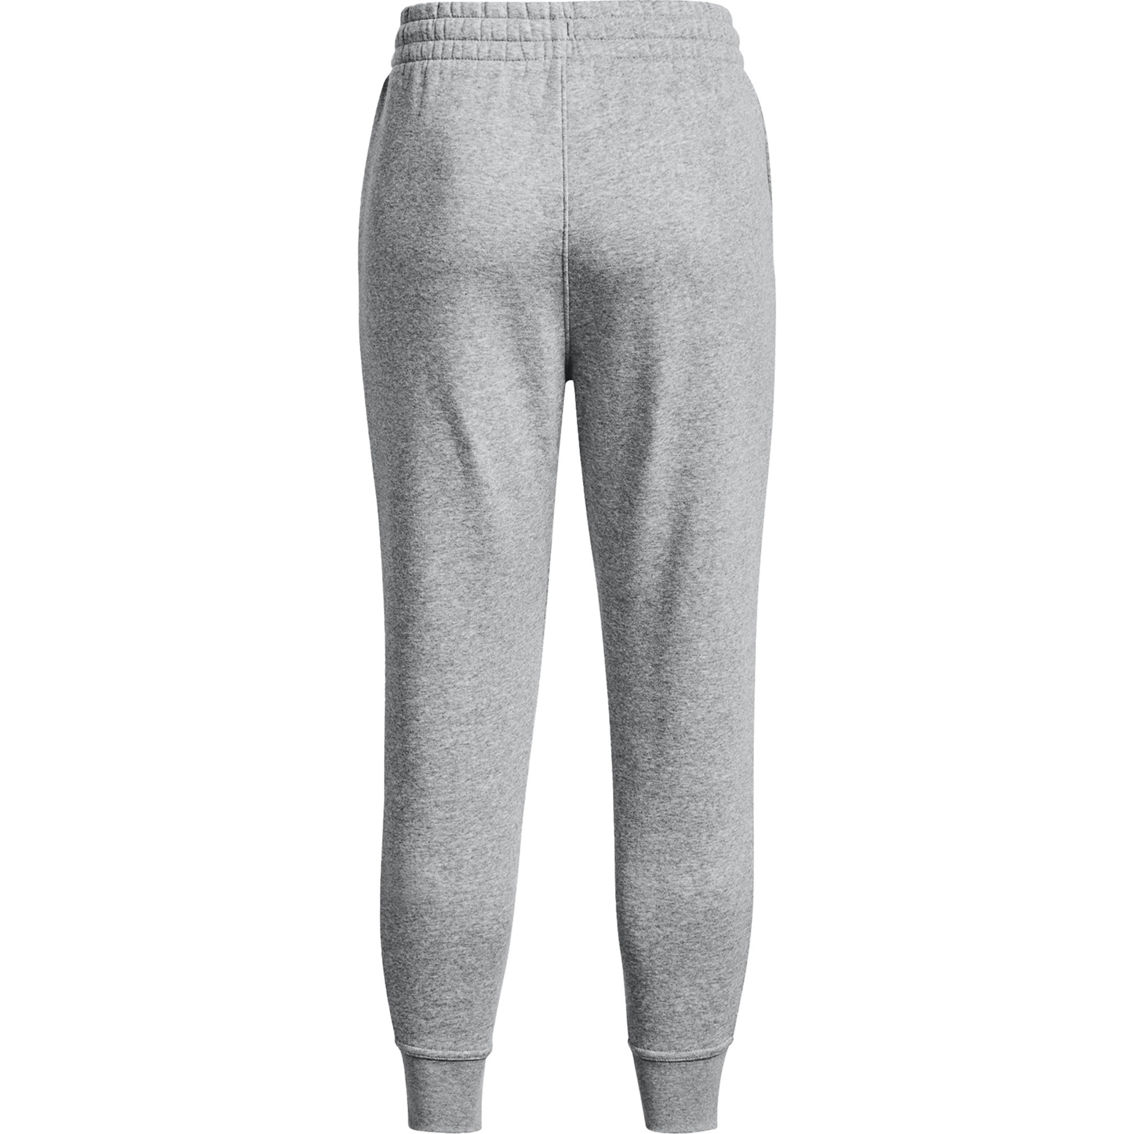 Under Armour Essential Fleece Tapered Pants | Pants | Clothing ...